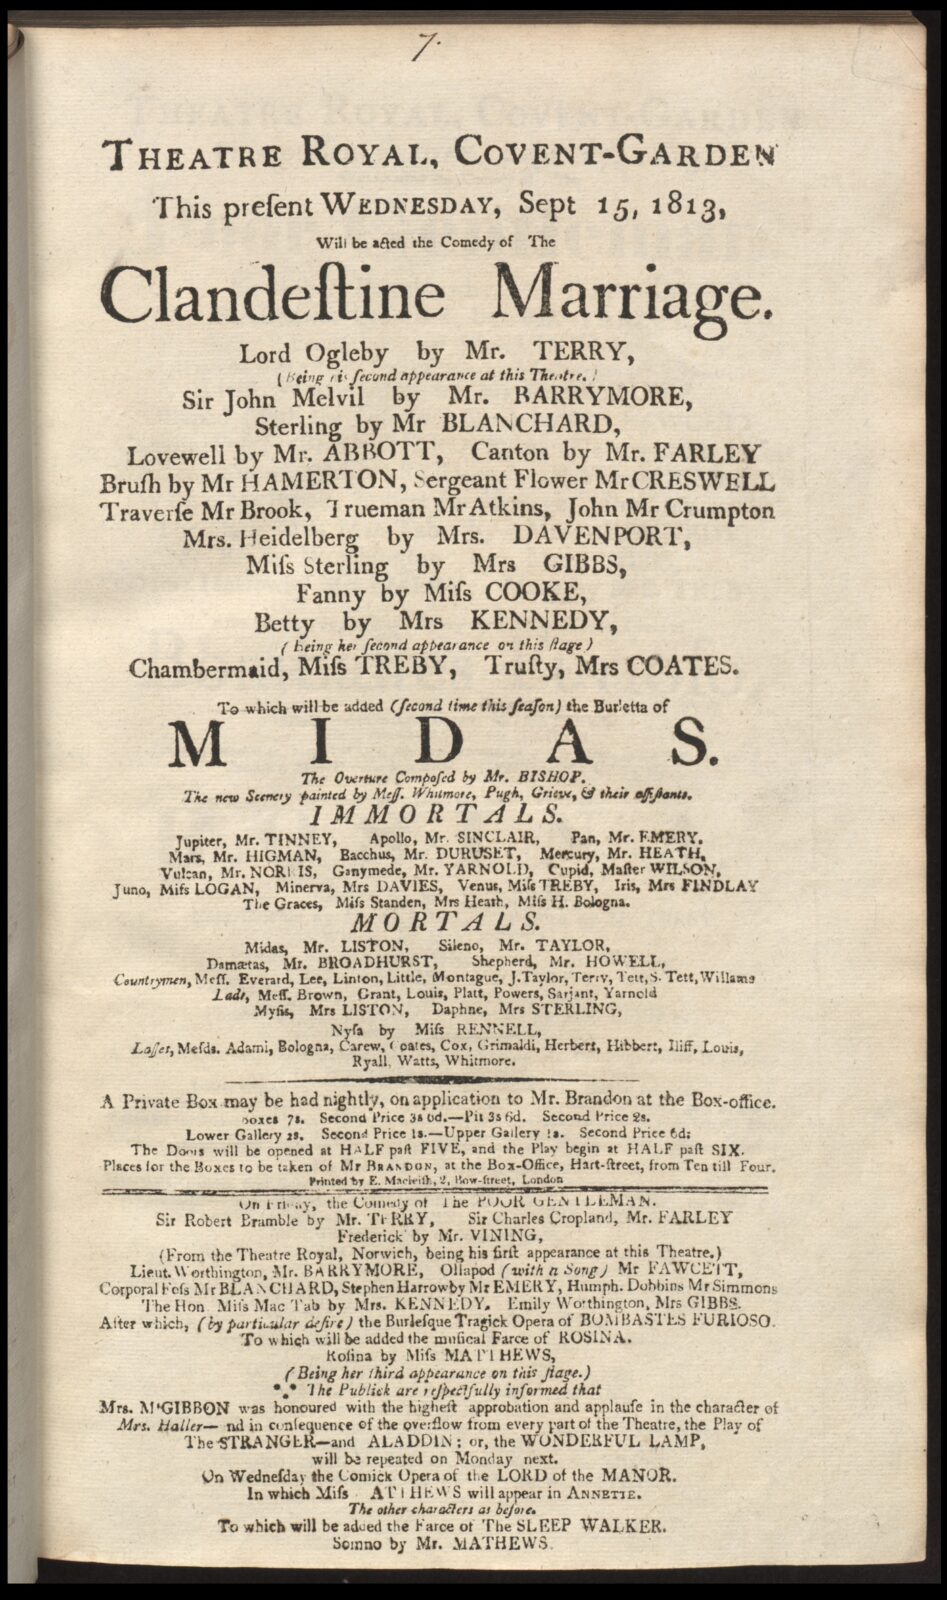 Bound playbill for The Clandestine Marriage John Johnson Collection, Playbills Covent Garden, 1813-1814, Bodleian Libraries